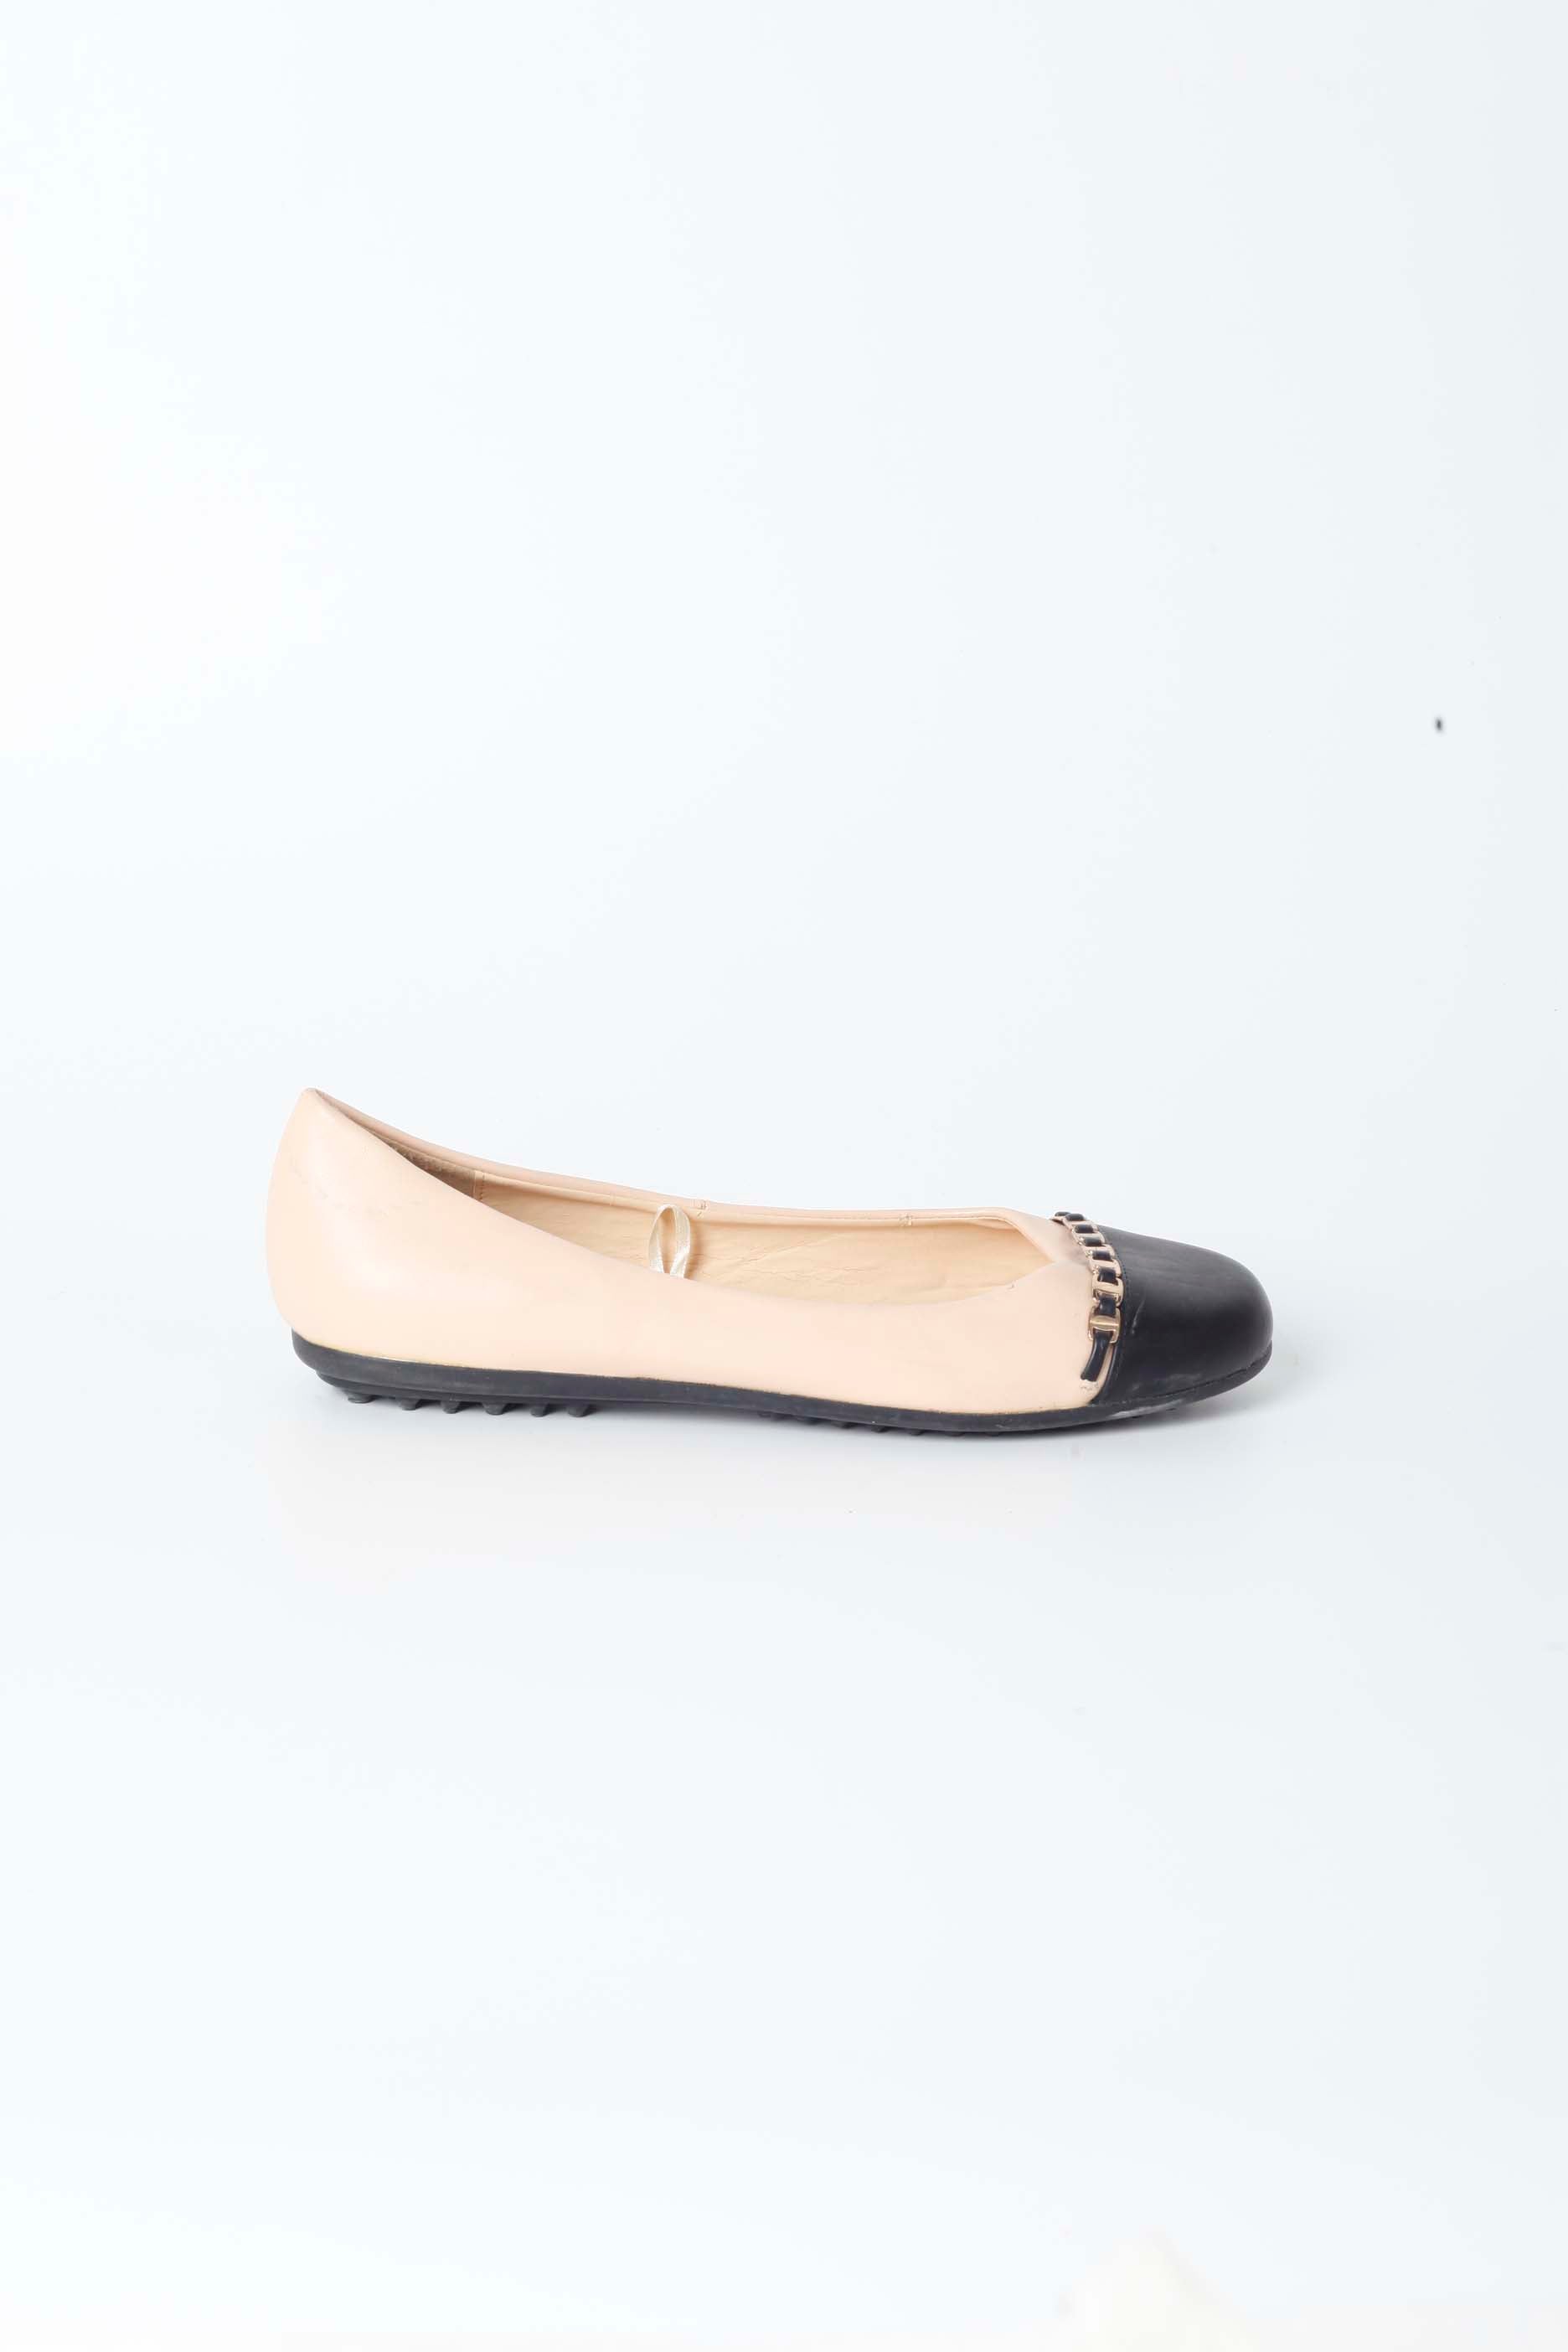 Black and Pink Flats